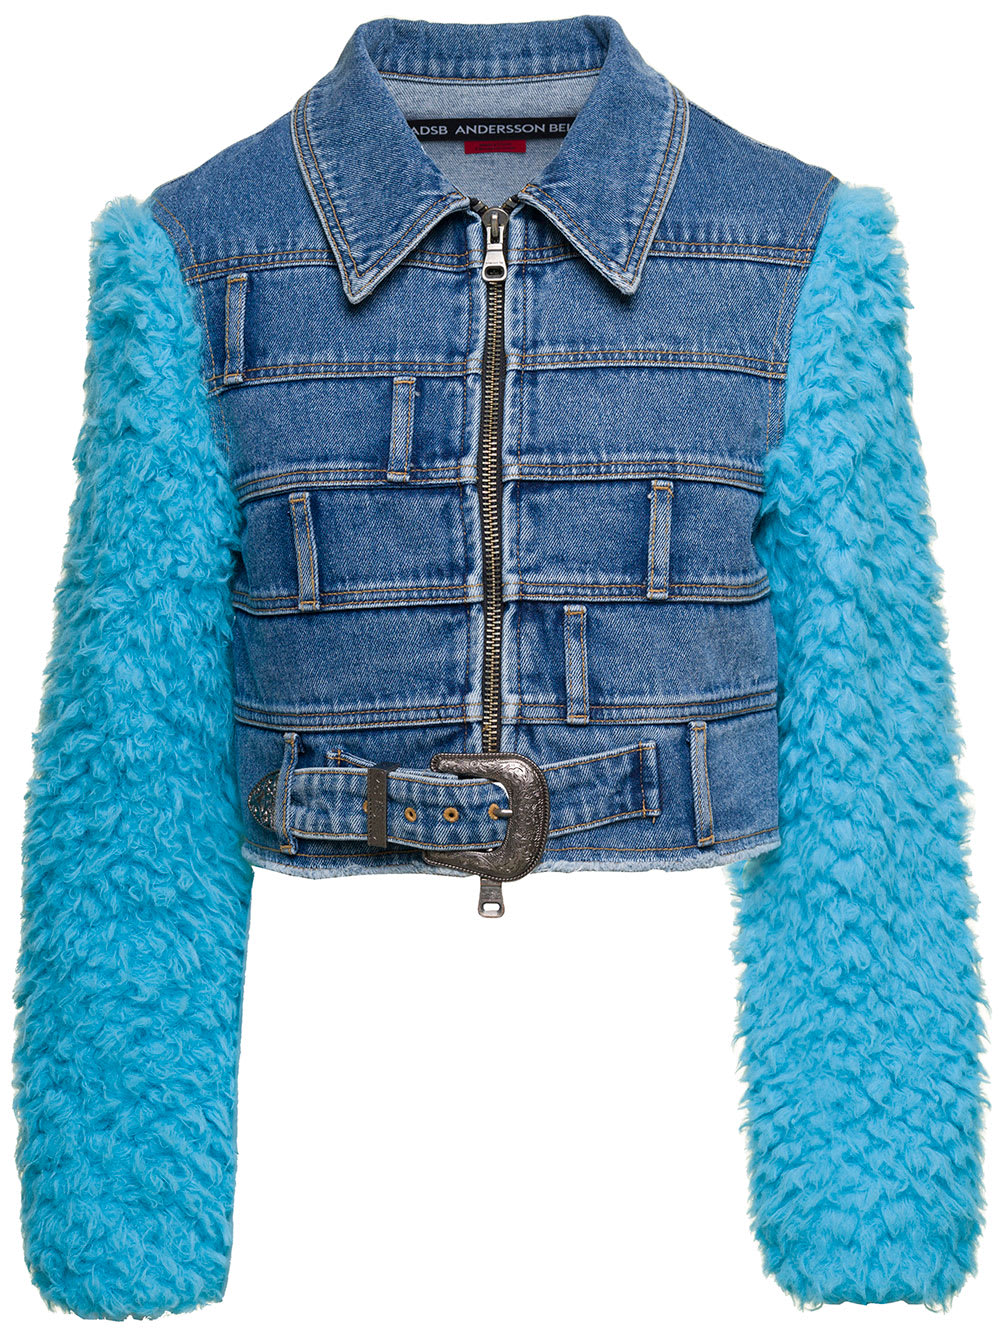 ANDERSSON BELL DUA LIGHT BLUE JACKET WITH FAUX-FUR SLEEVES AND MULTI-WAIST EFFECT IN COTTON DENIM WOMAN